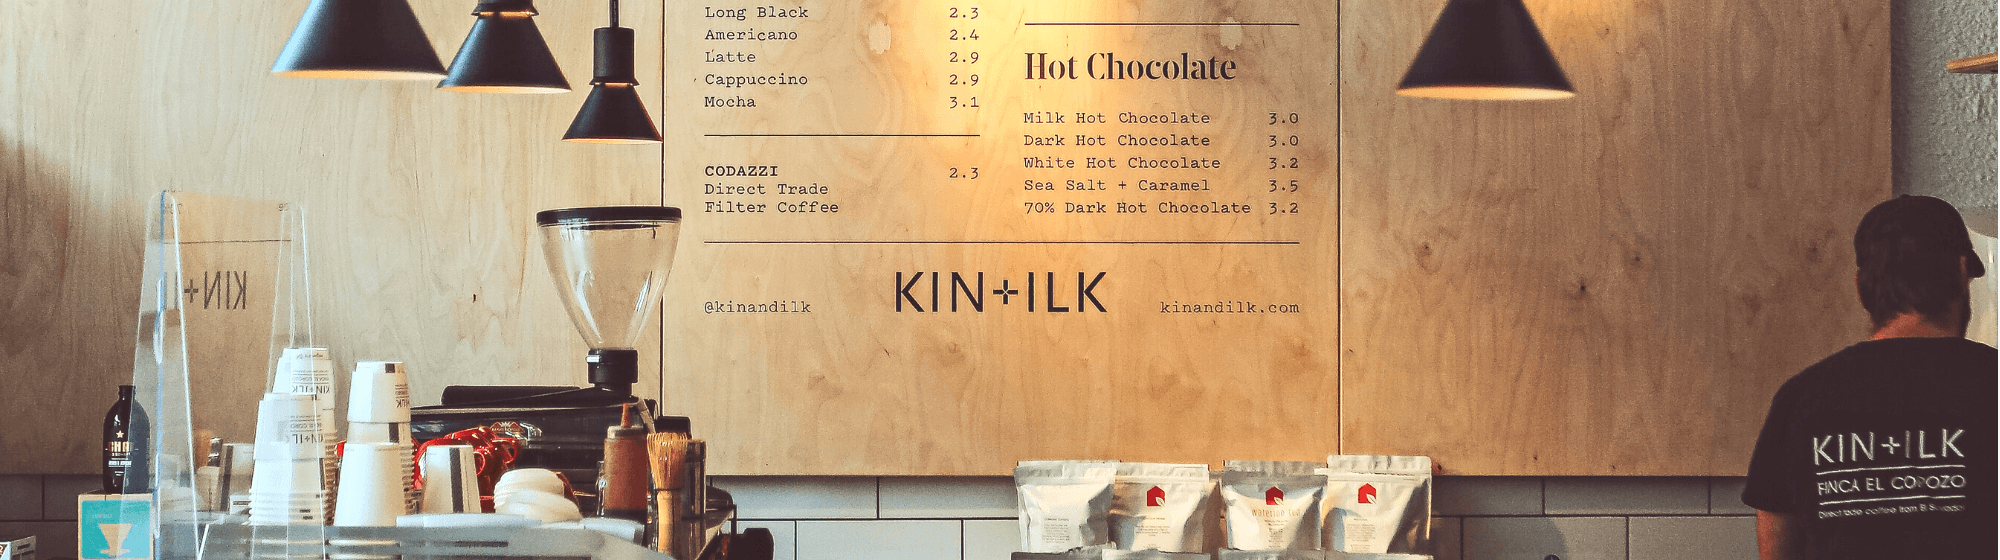 Hot and cold drinks, and vegan snacks on coffee shop menu